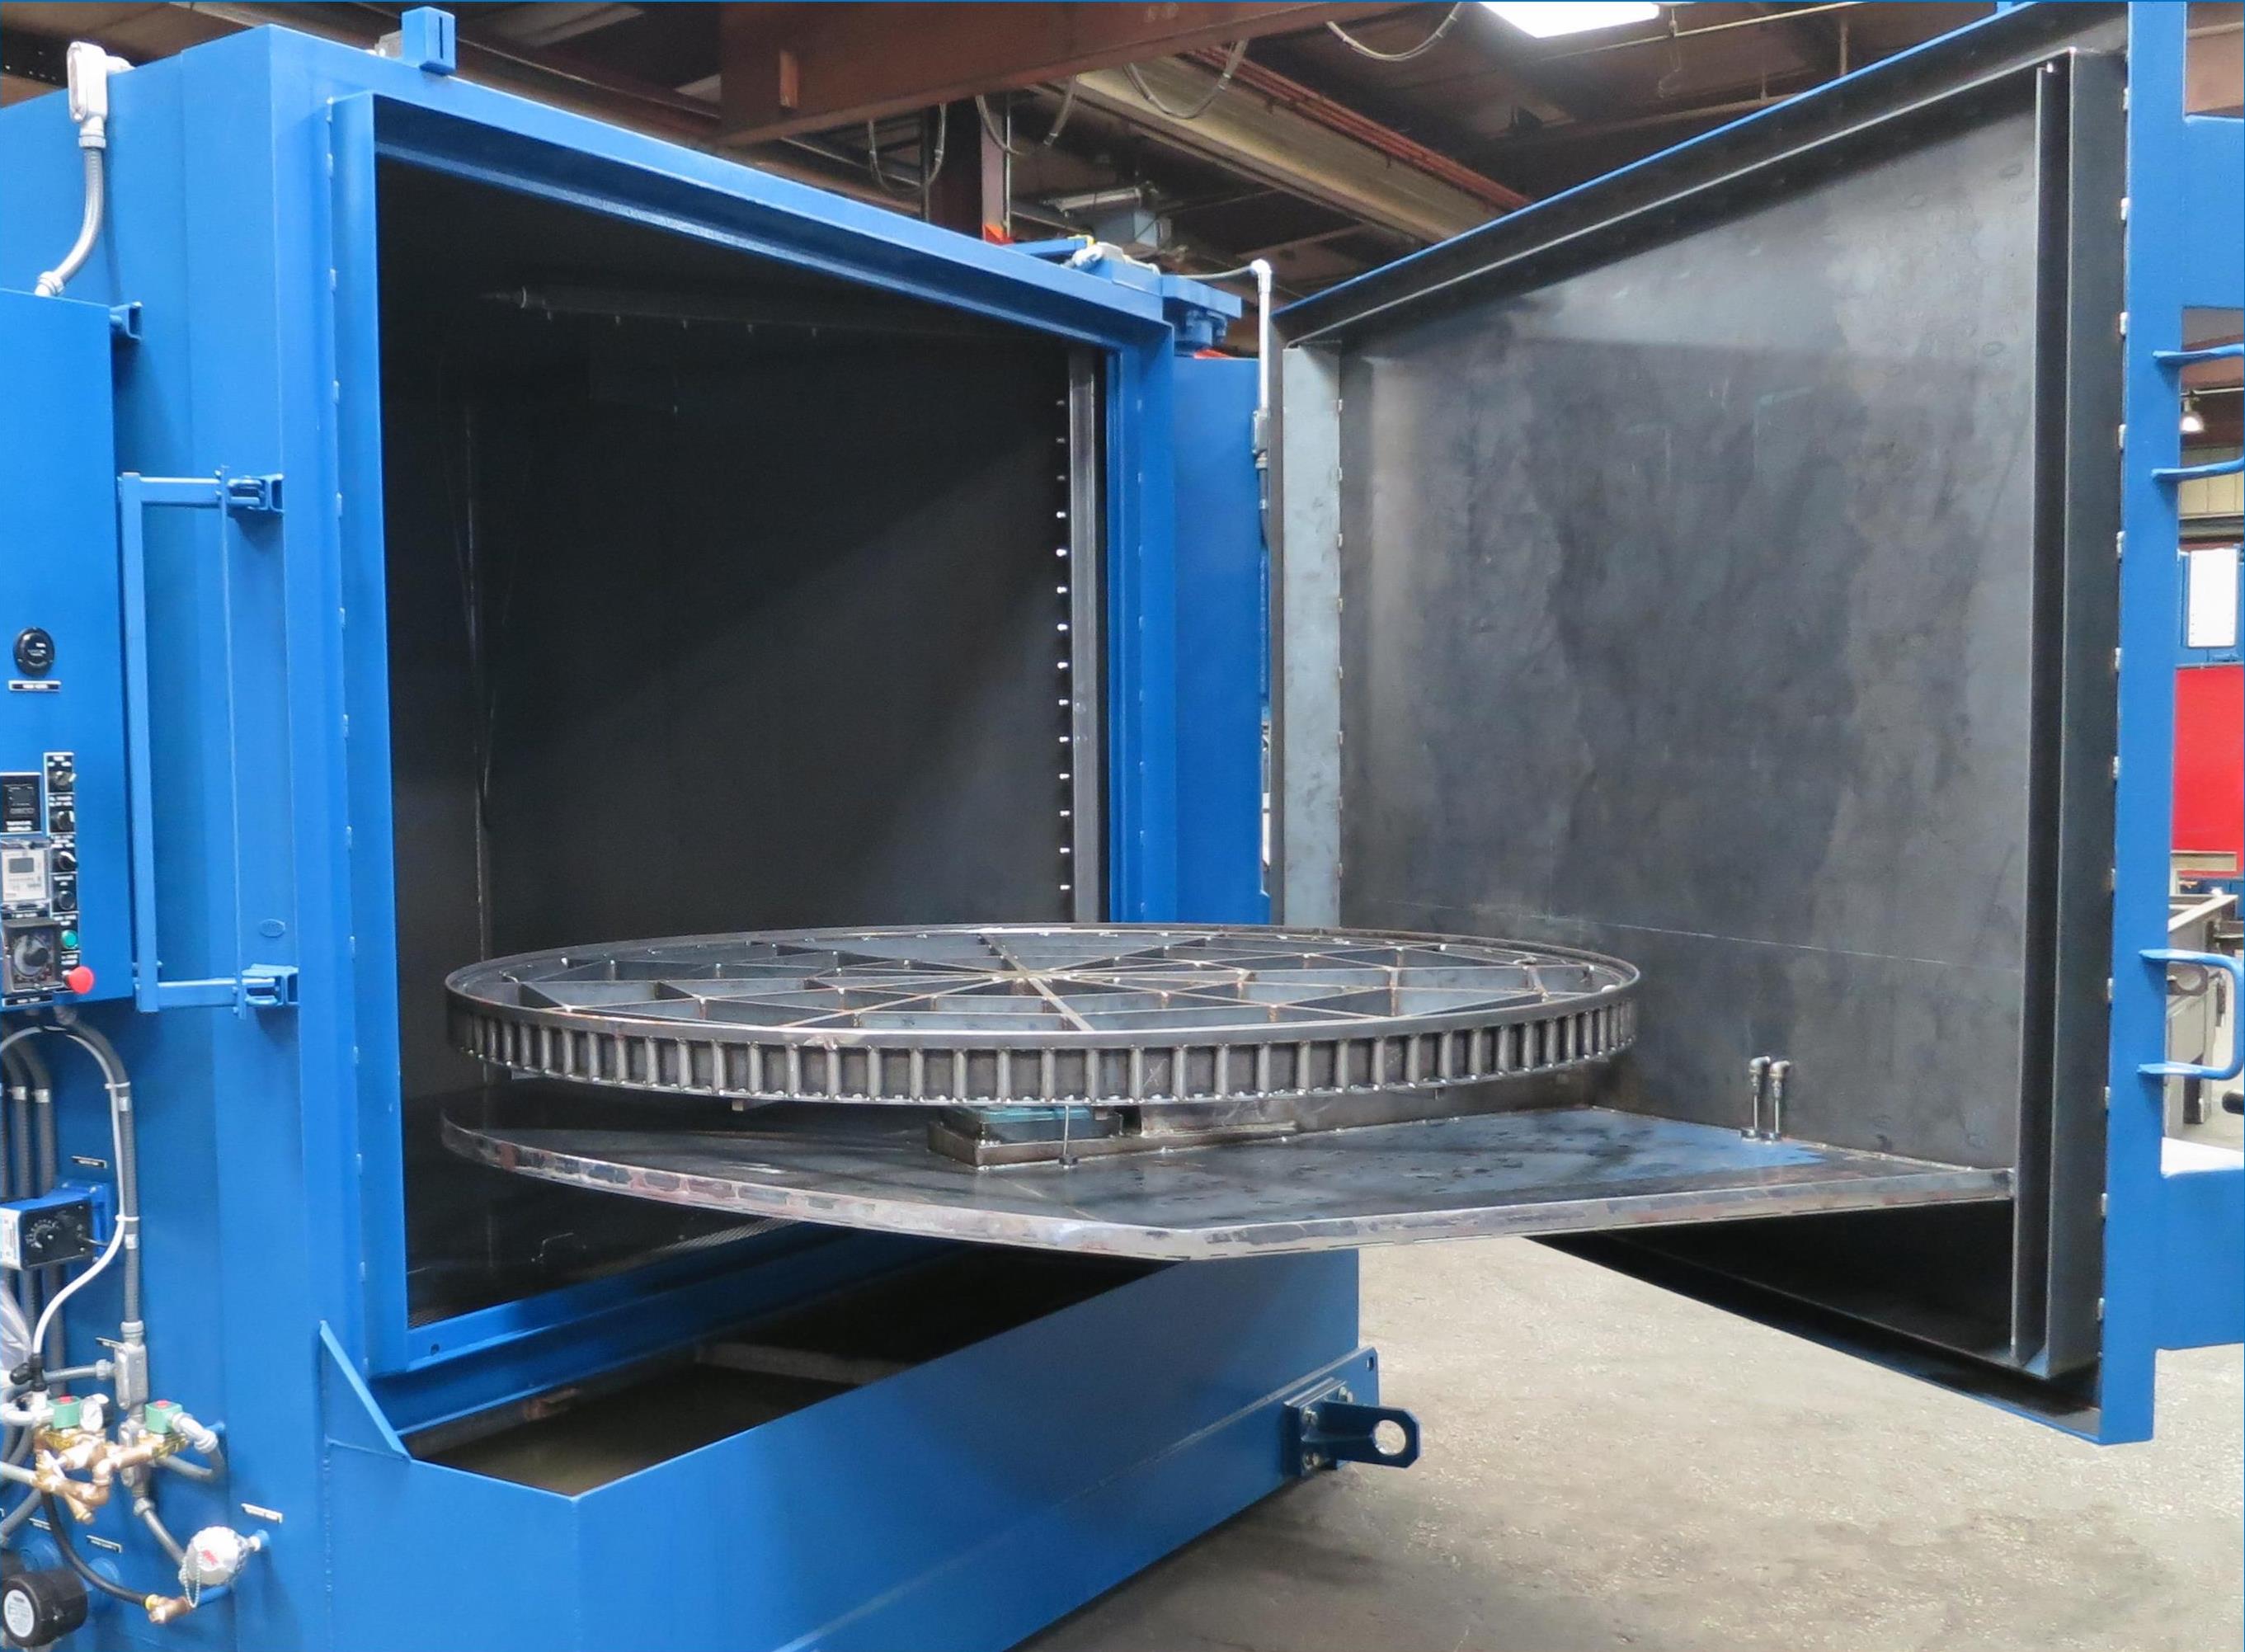 StingRay Aqueous Parts Washer 84 Inch Turntable for Oil Drilling Equipment